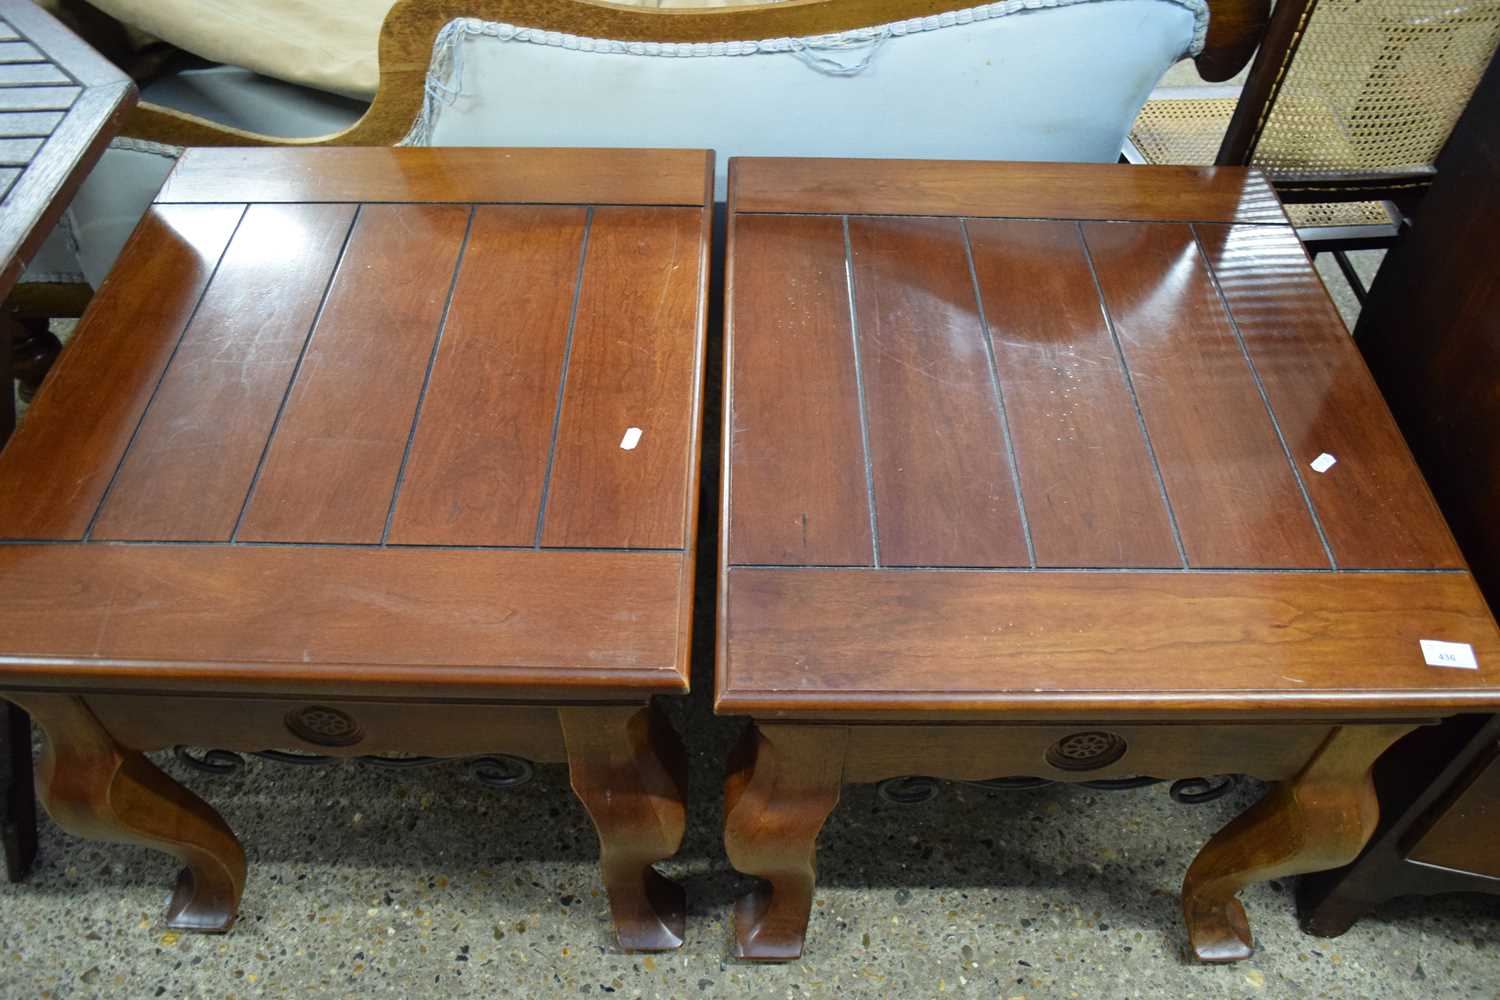 PAIR OF MODERN HARDWOOD COFFEE OR LAMP TABLES WITH CABRIOLE LEGS AND WROUGHT IRON DETAIL, 70CM WIDE